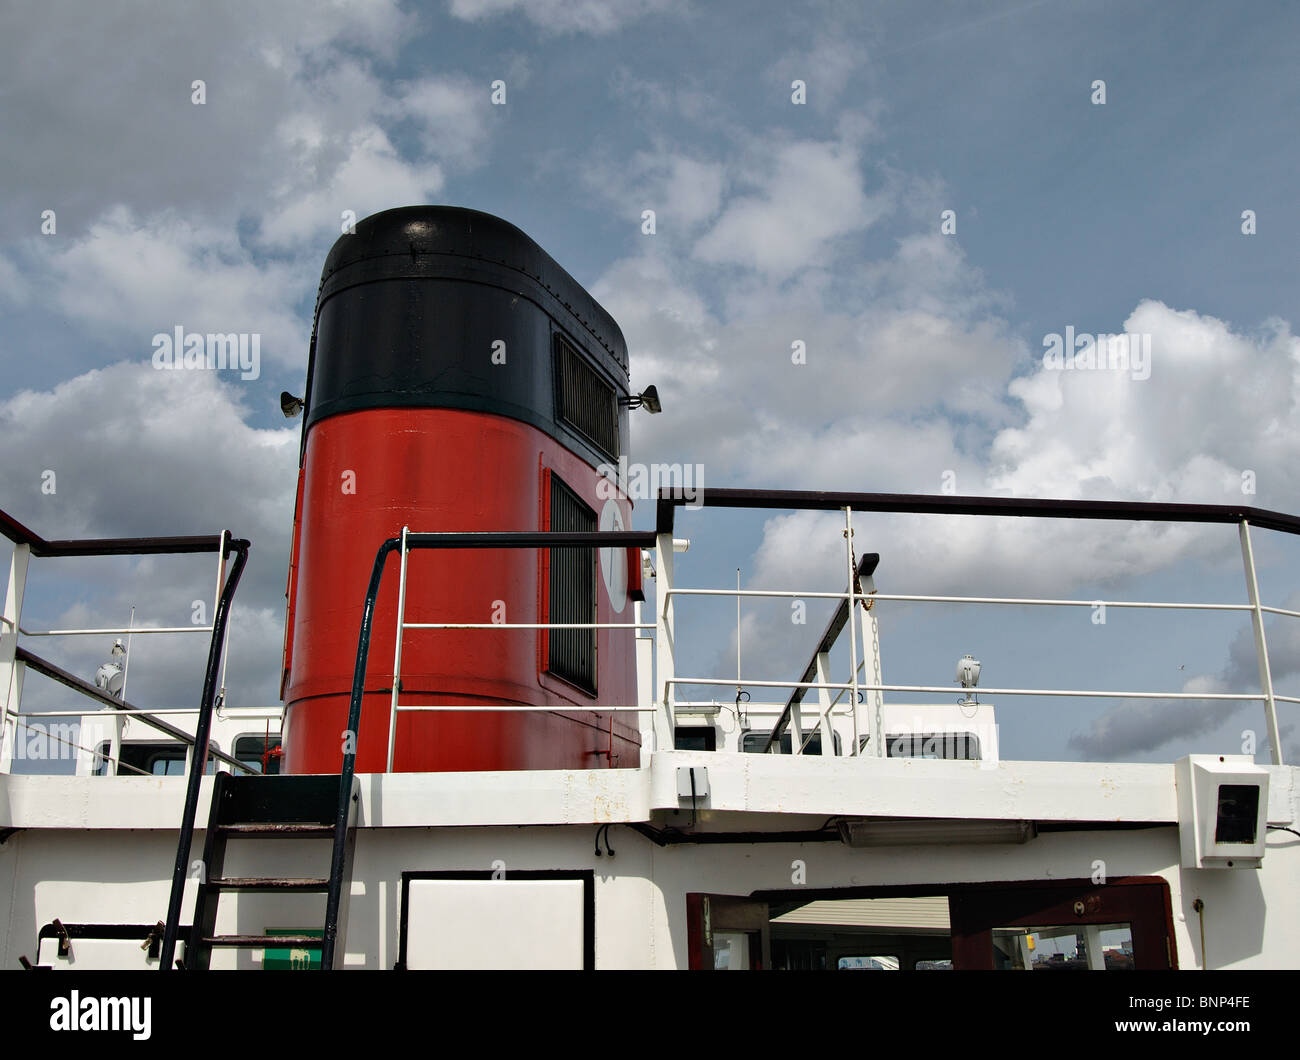 Red and Black Funnel, Mersey Ferry Stock Photo